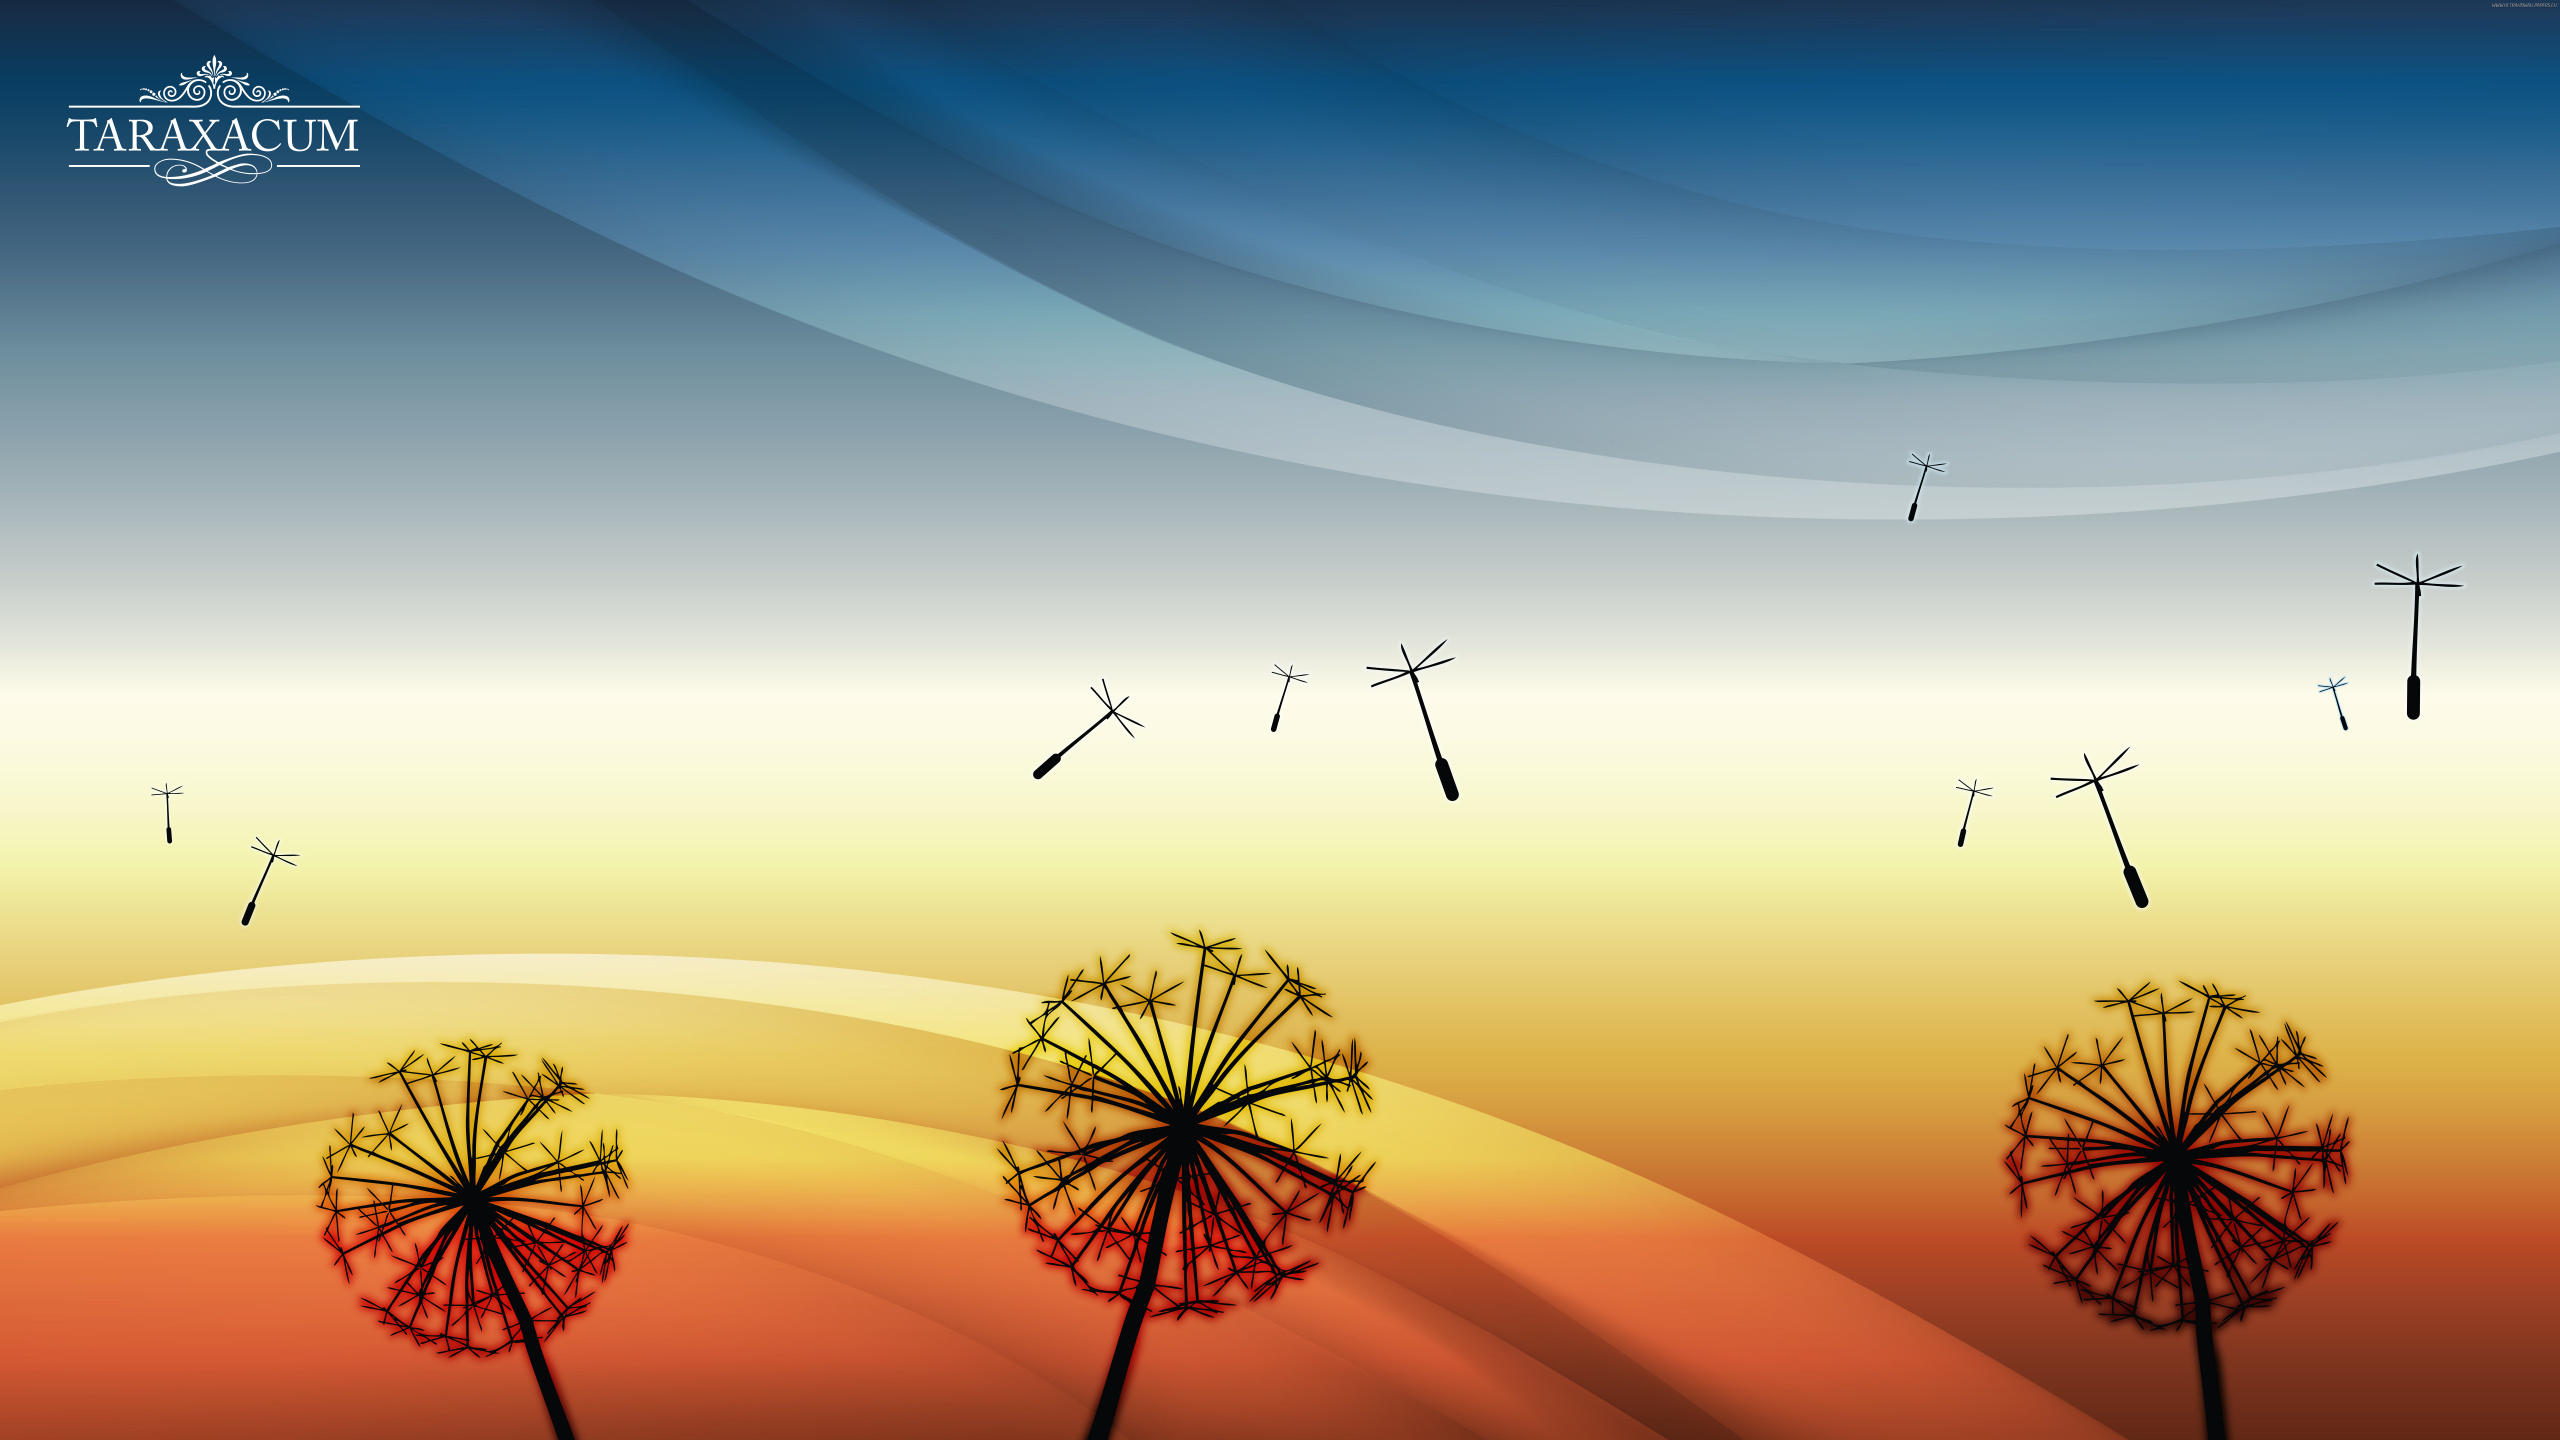 Silhouette of Birds Flying Over The Sky During Sunset. Wallpaper in 2560x1440 Resolution